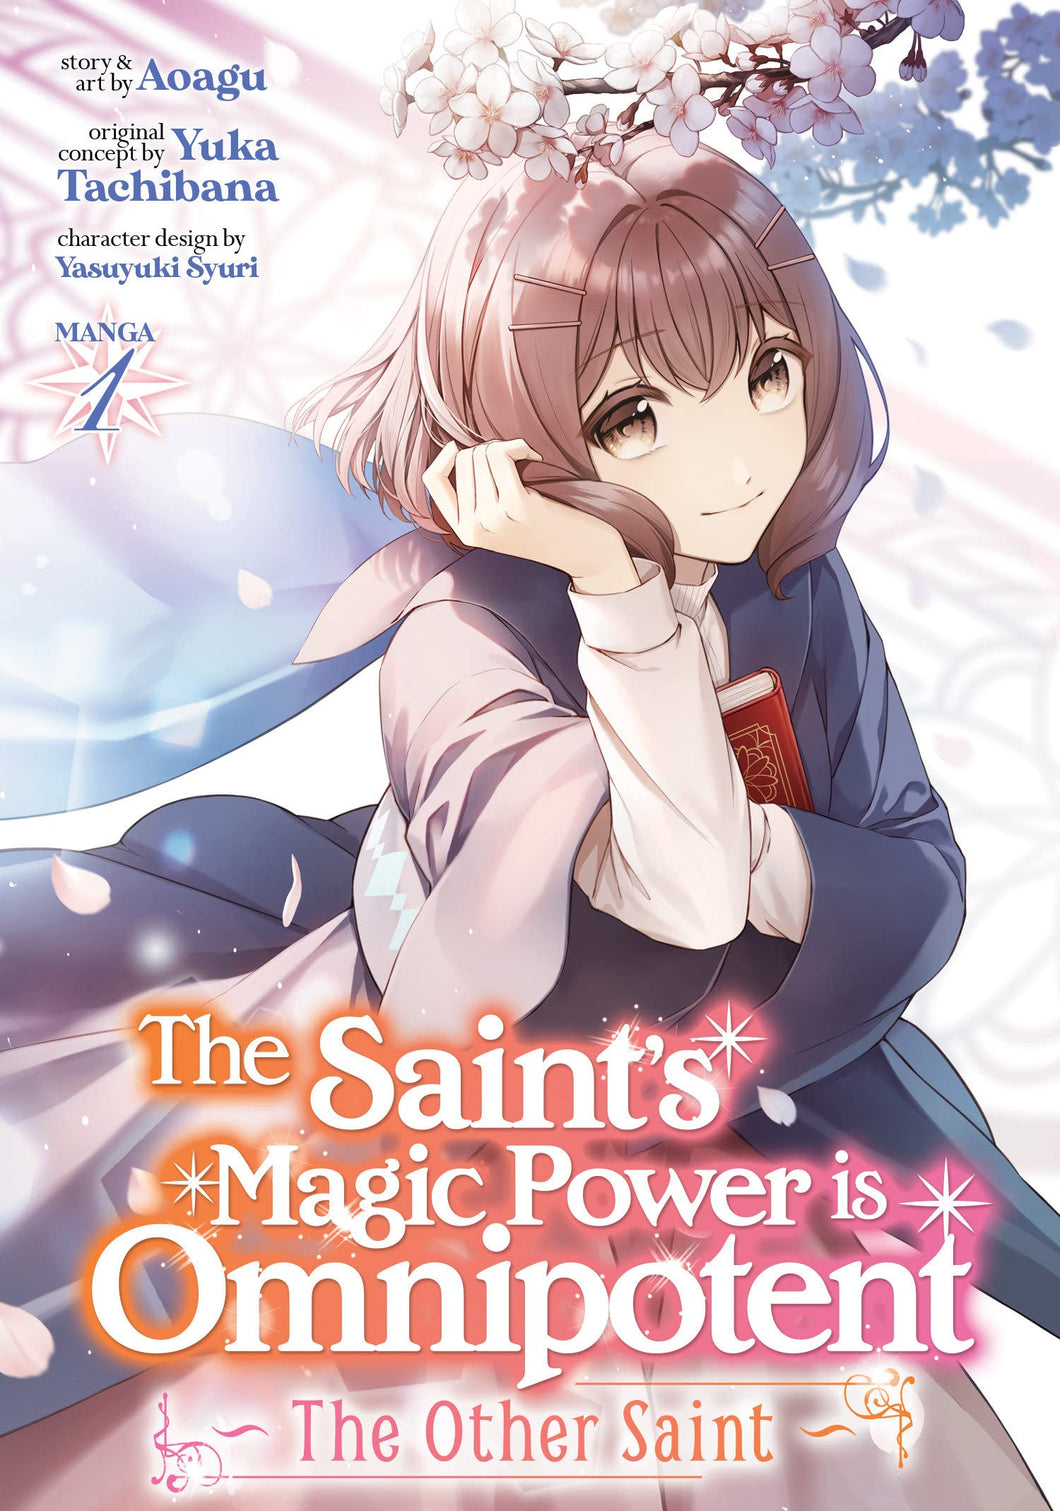 The Saint's Magic Power is Omnipotent The Other Saint Volume 1